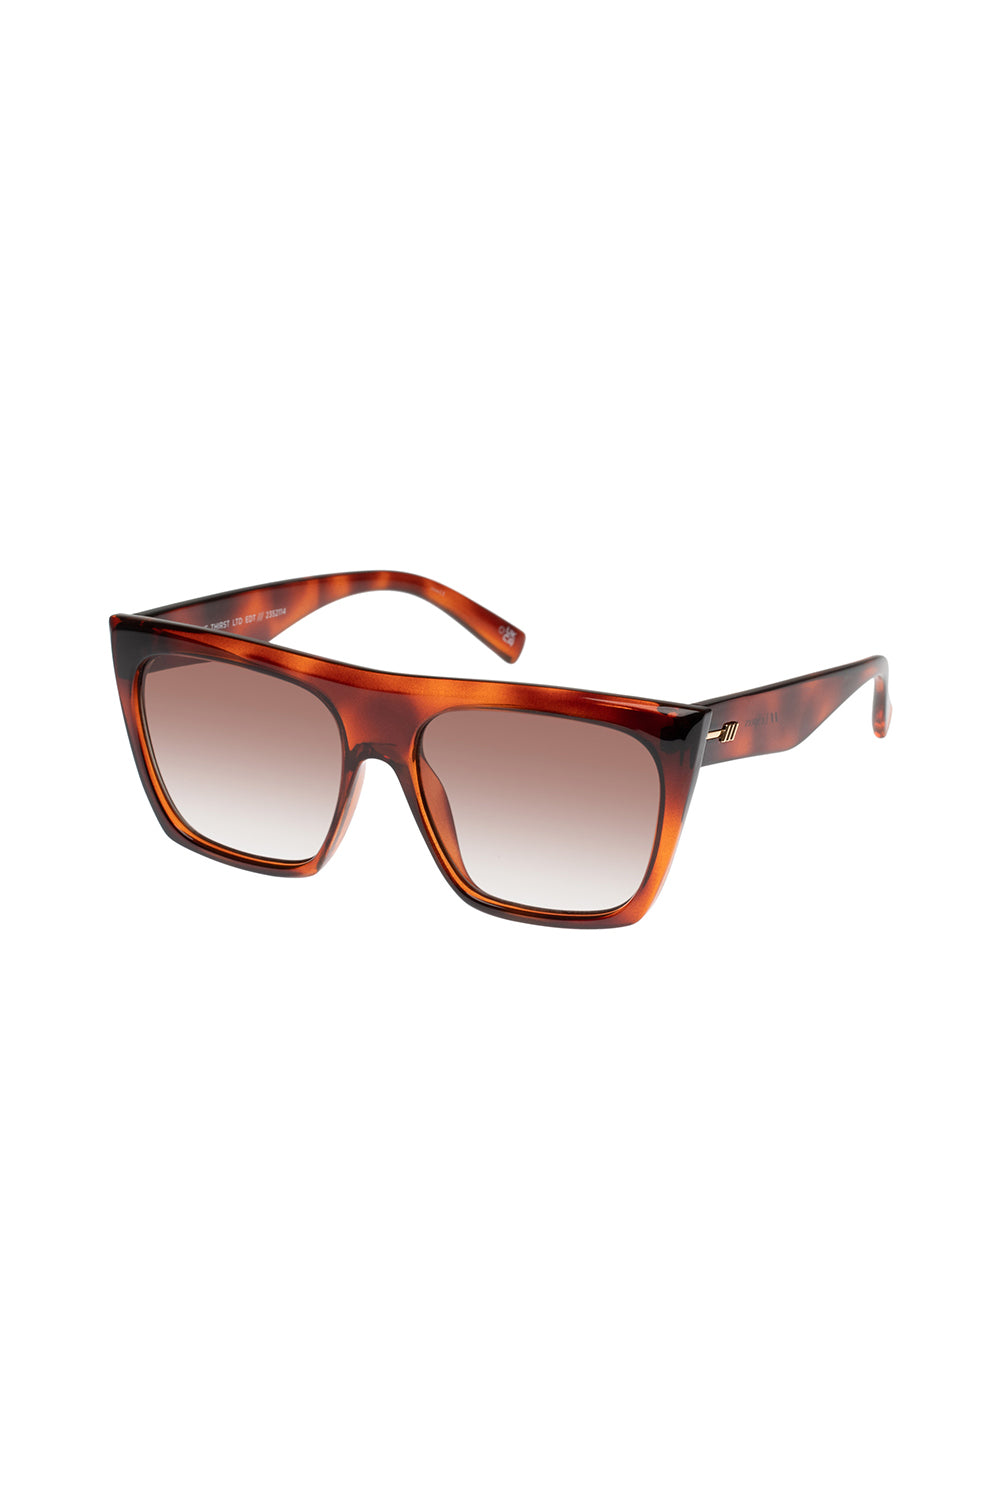 Le Specs The Thirst Sunglasses - Toffee Tort - RUM Amsterdam